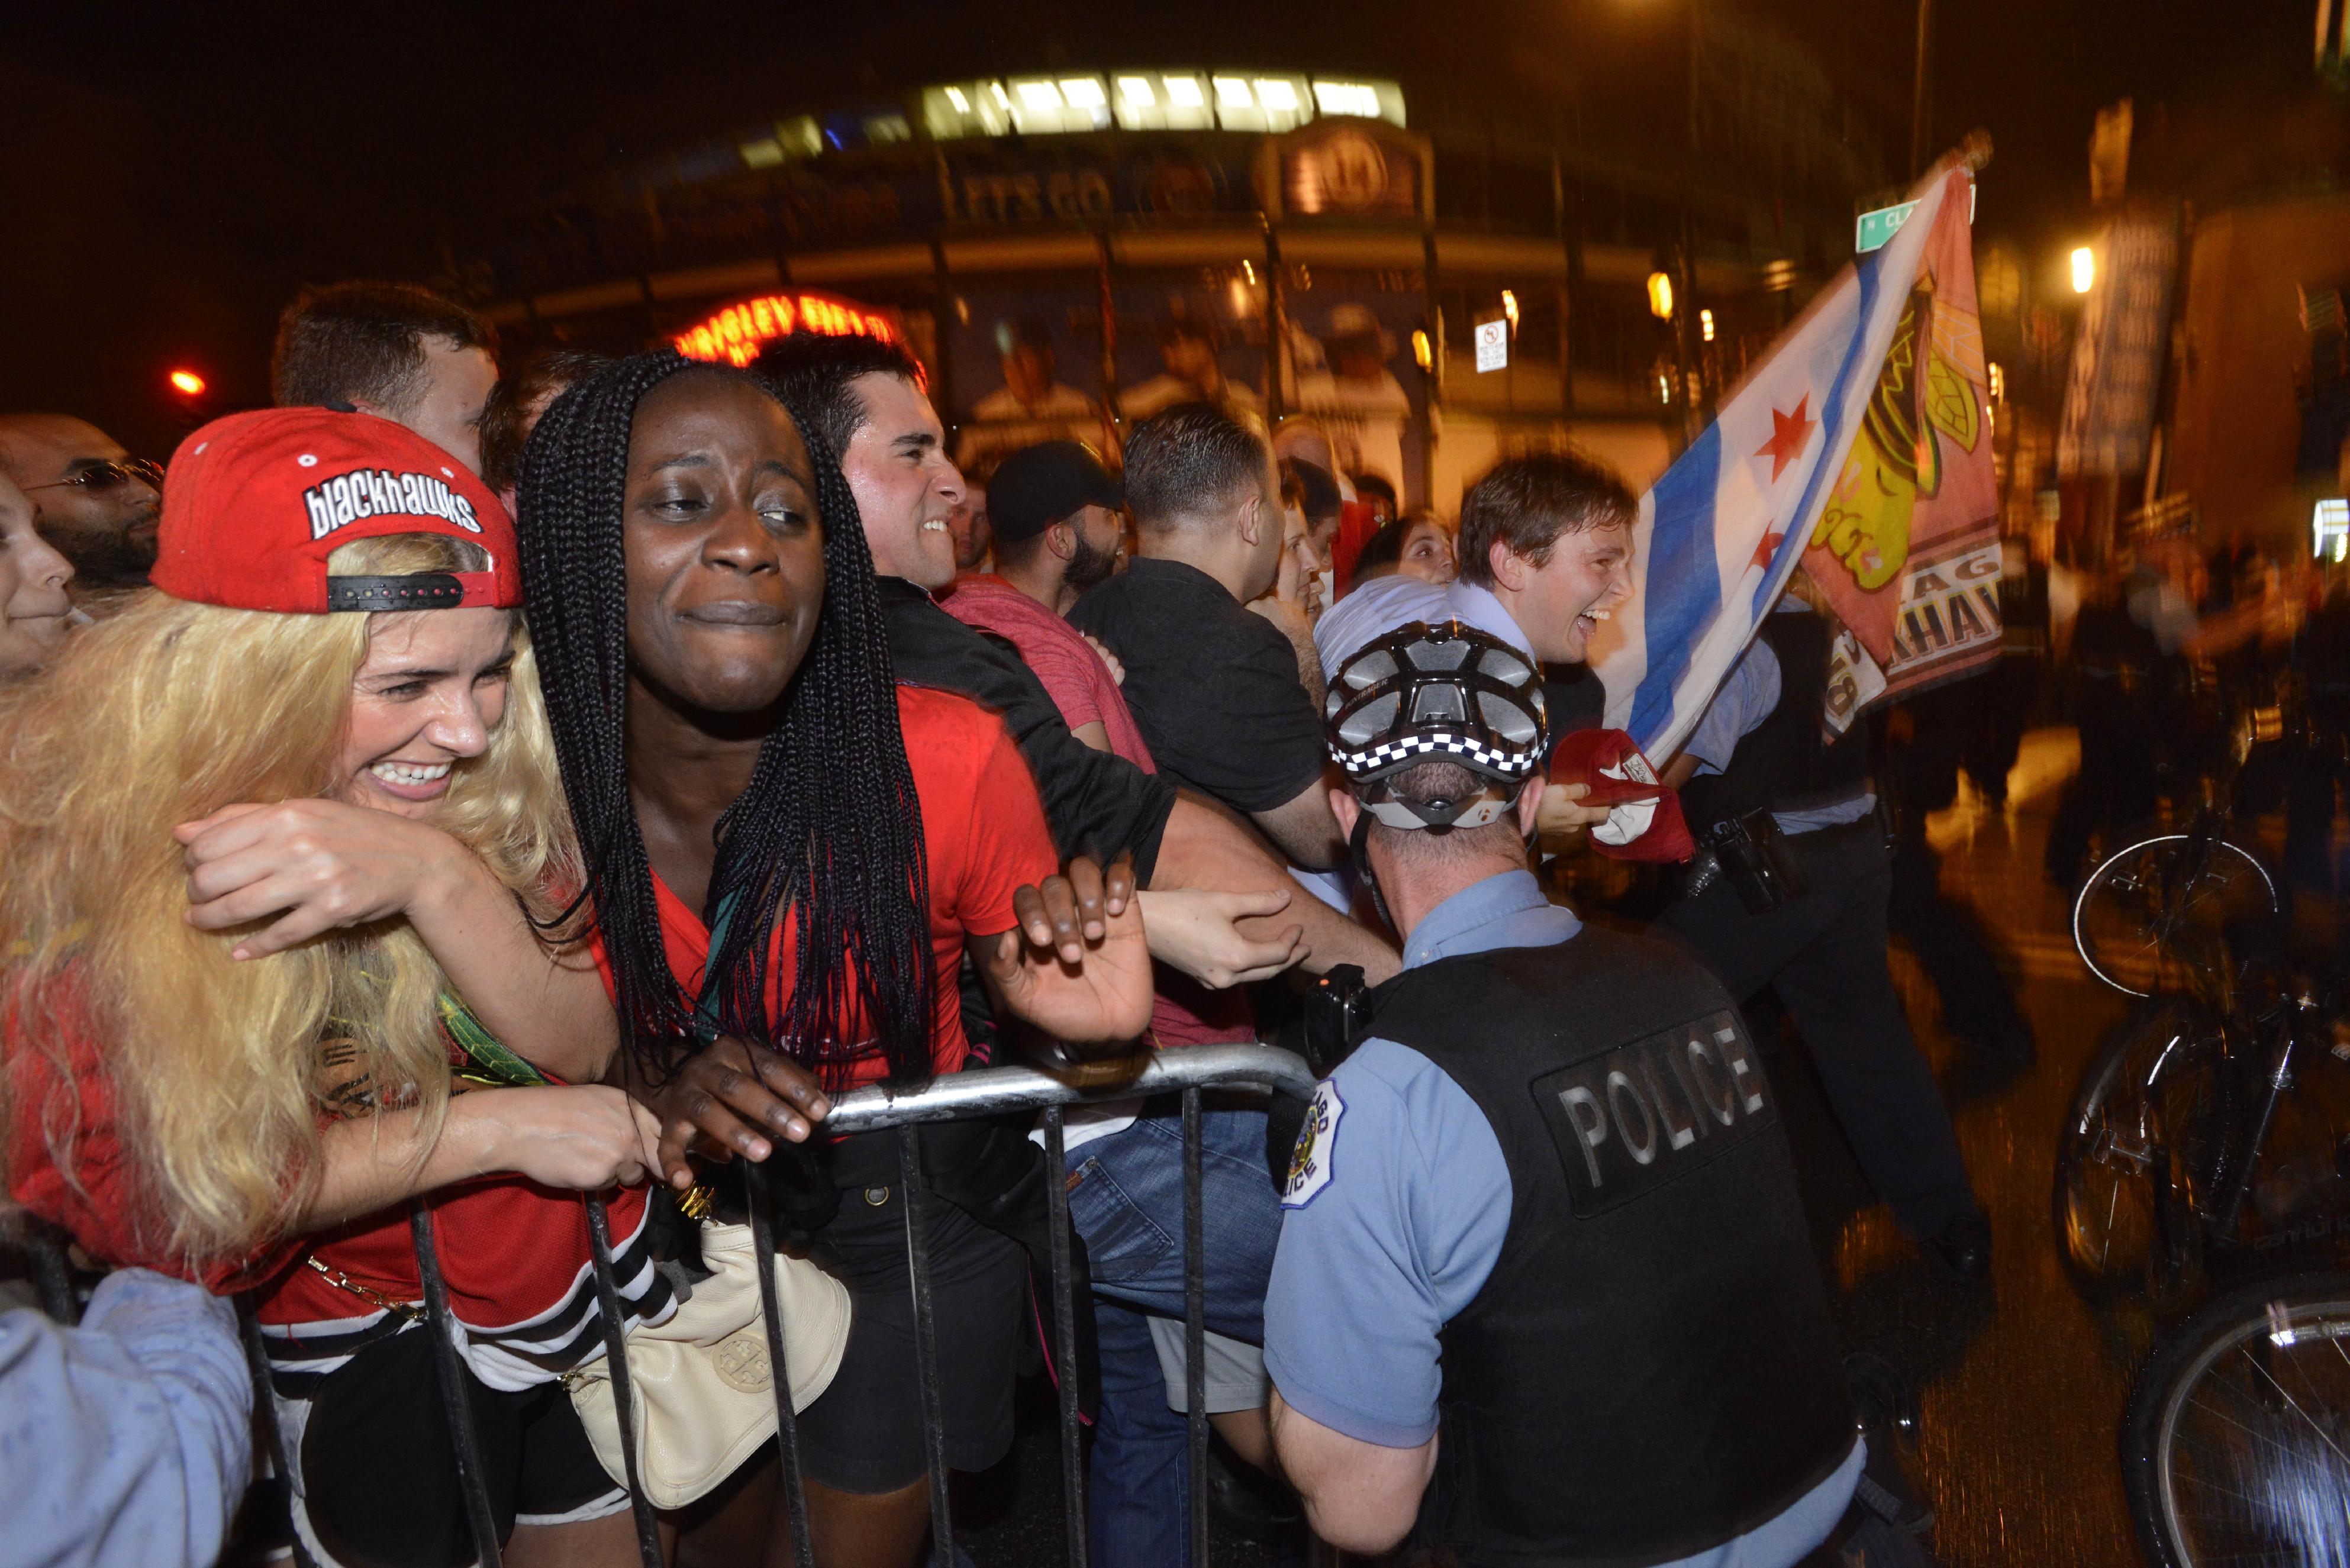 Chicago Blackhawks fans are pushed up against a barricade while celebrating on Clark street in the Wrigleyville neighborhood after the Chicago Blackhawks won the Stanley Cup, defeating the Tampa Bay Lightning in Chicago on Monday, June 15, 2015. (AP Photo/Paul Beaty)